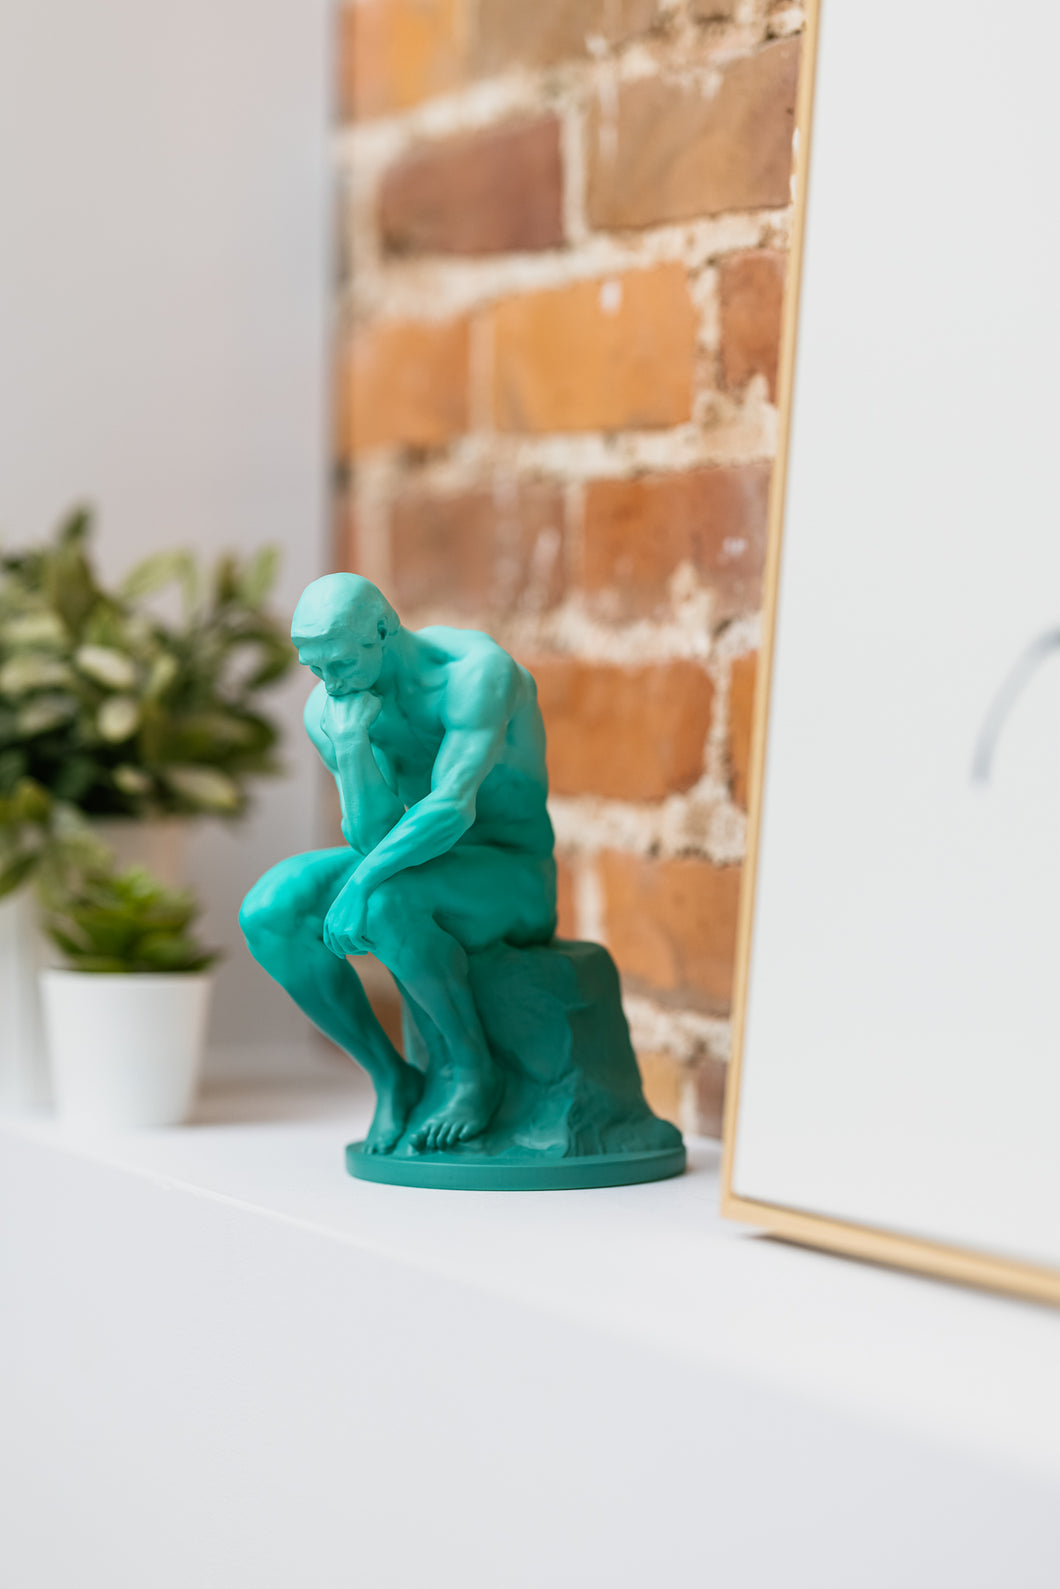 The Thinker - Statue – Today is Art Day